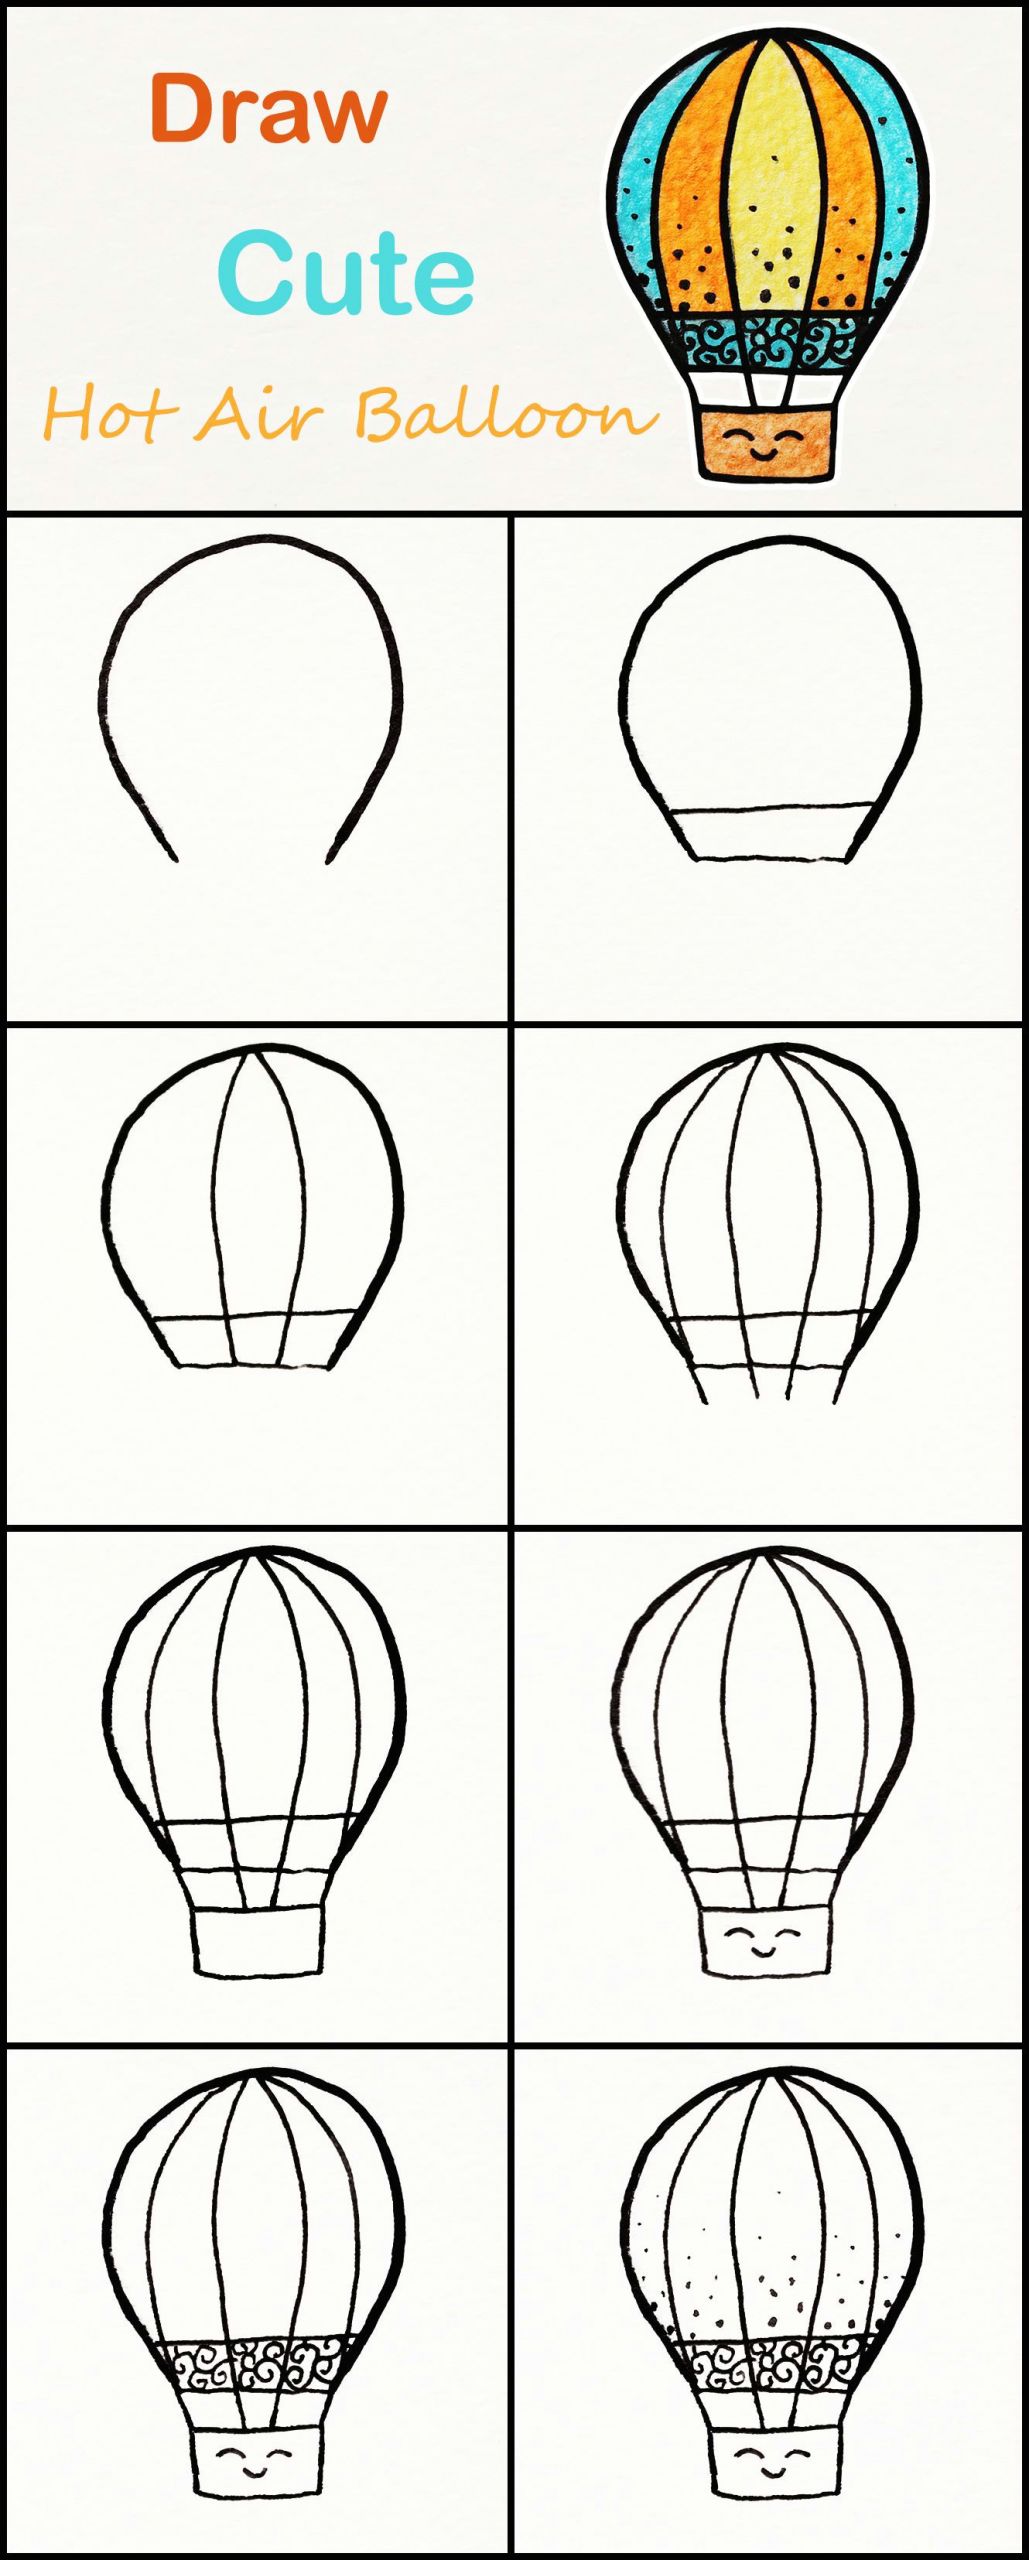 Balloon Drawing Easy Learn How to Draw A Cute Hot Air Balloon Step by Step